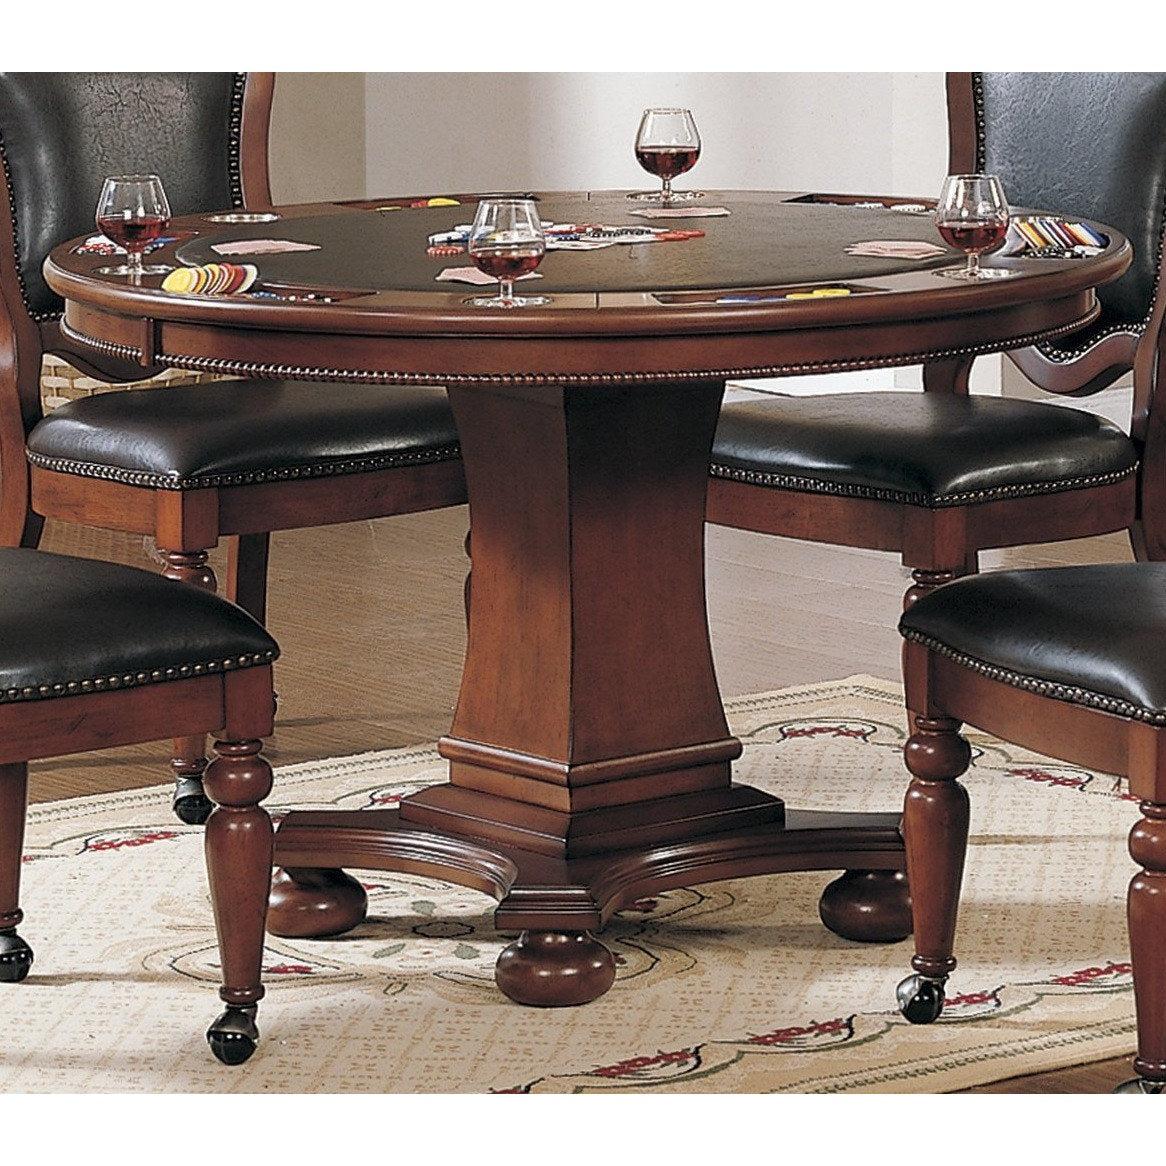 Convertible Poker & Dining Table Set Bellagio With matching chairs-AMERICANA-POKER-TABLES